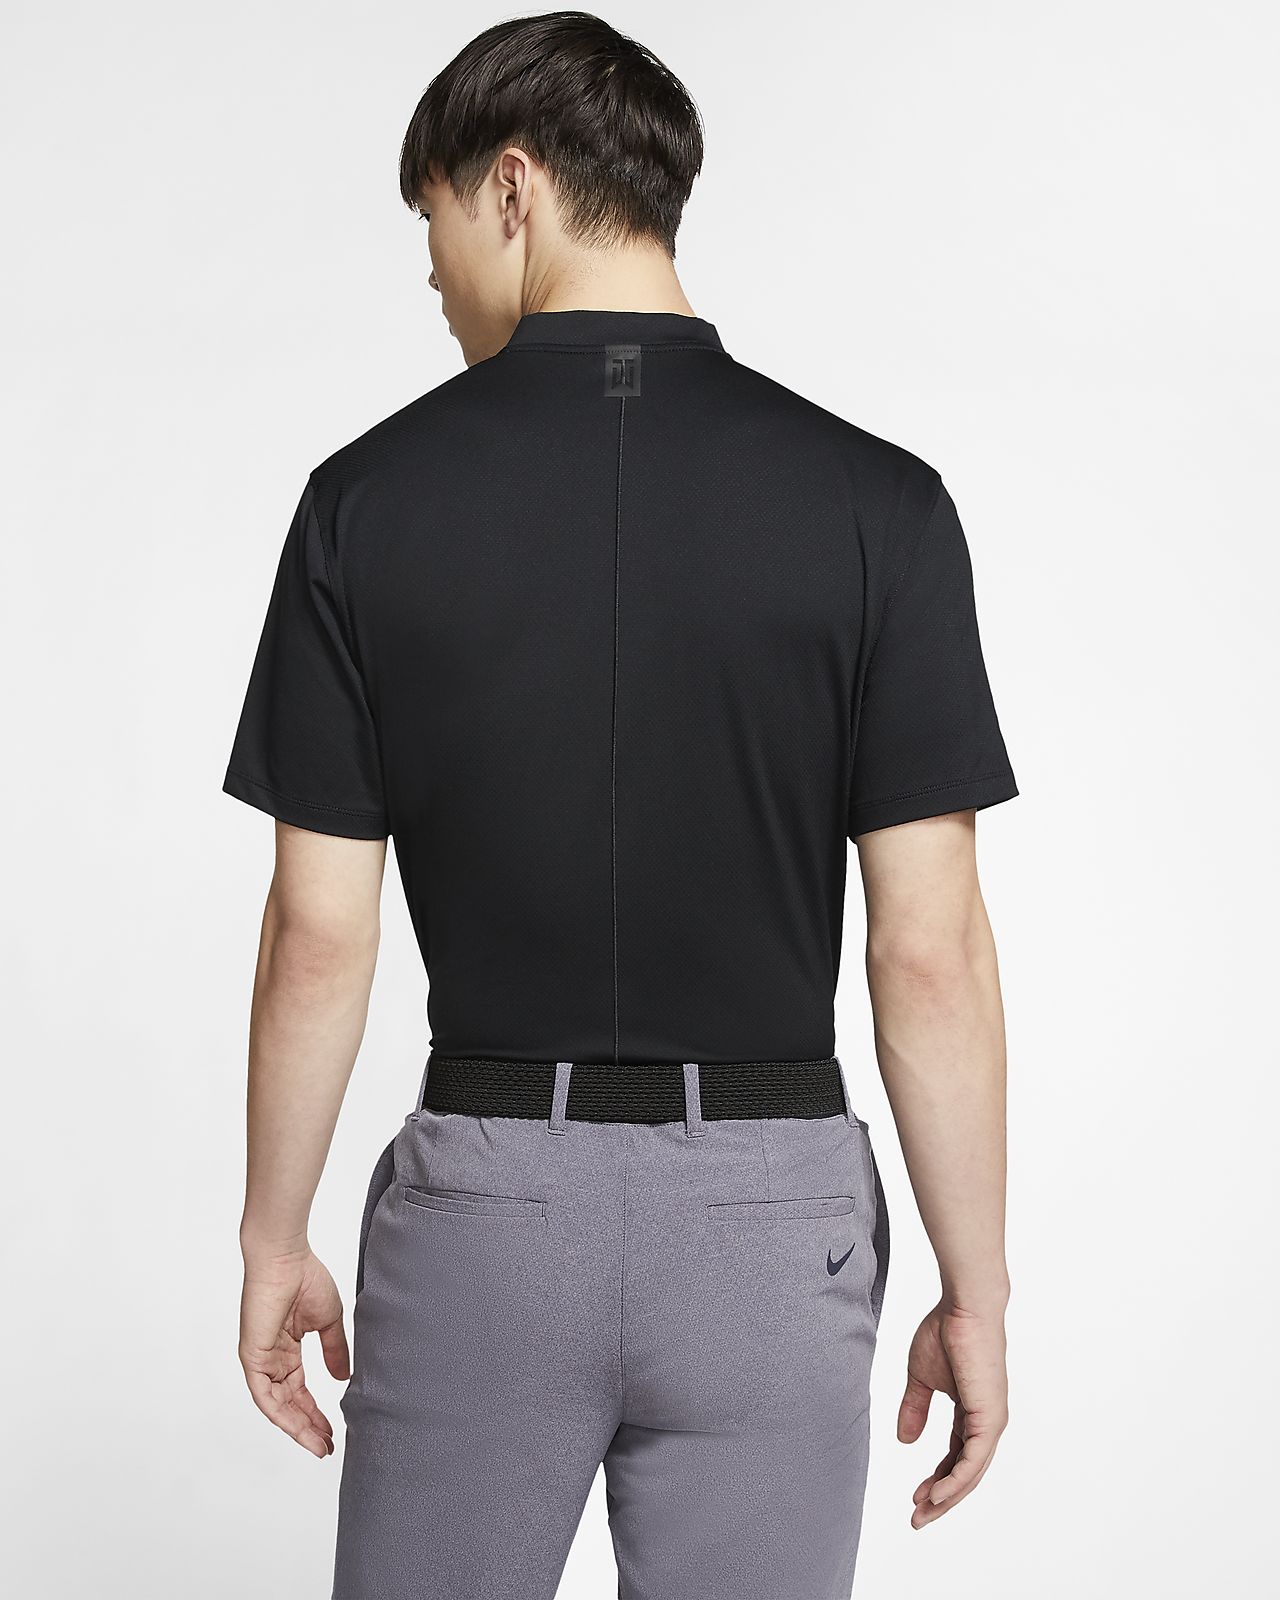 Buy > tiger woods collarless golf shirt > in stock